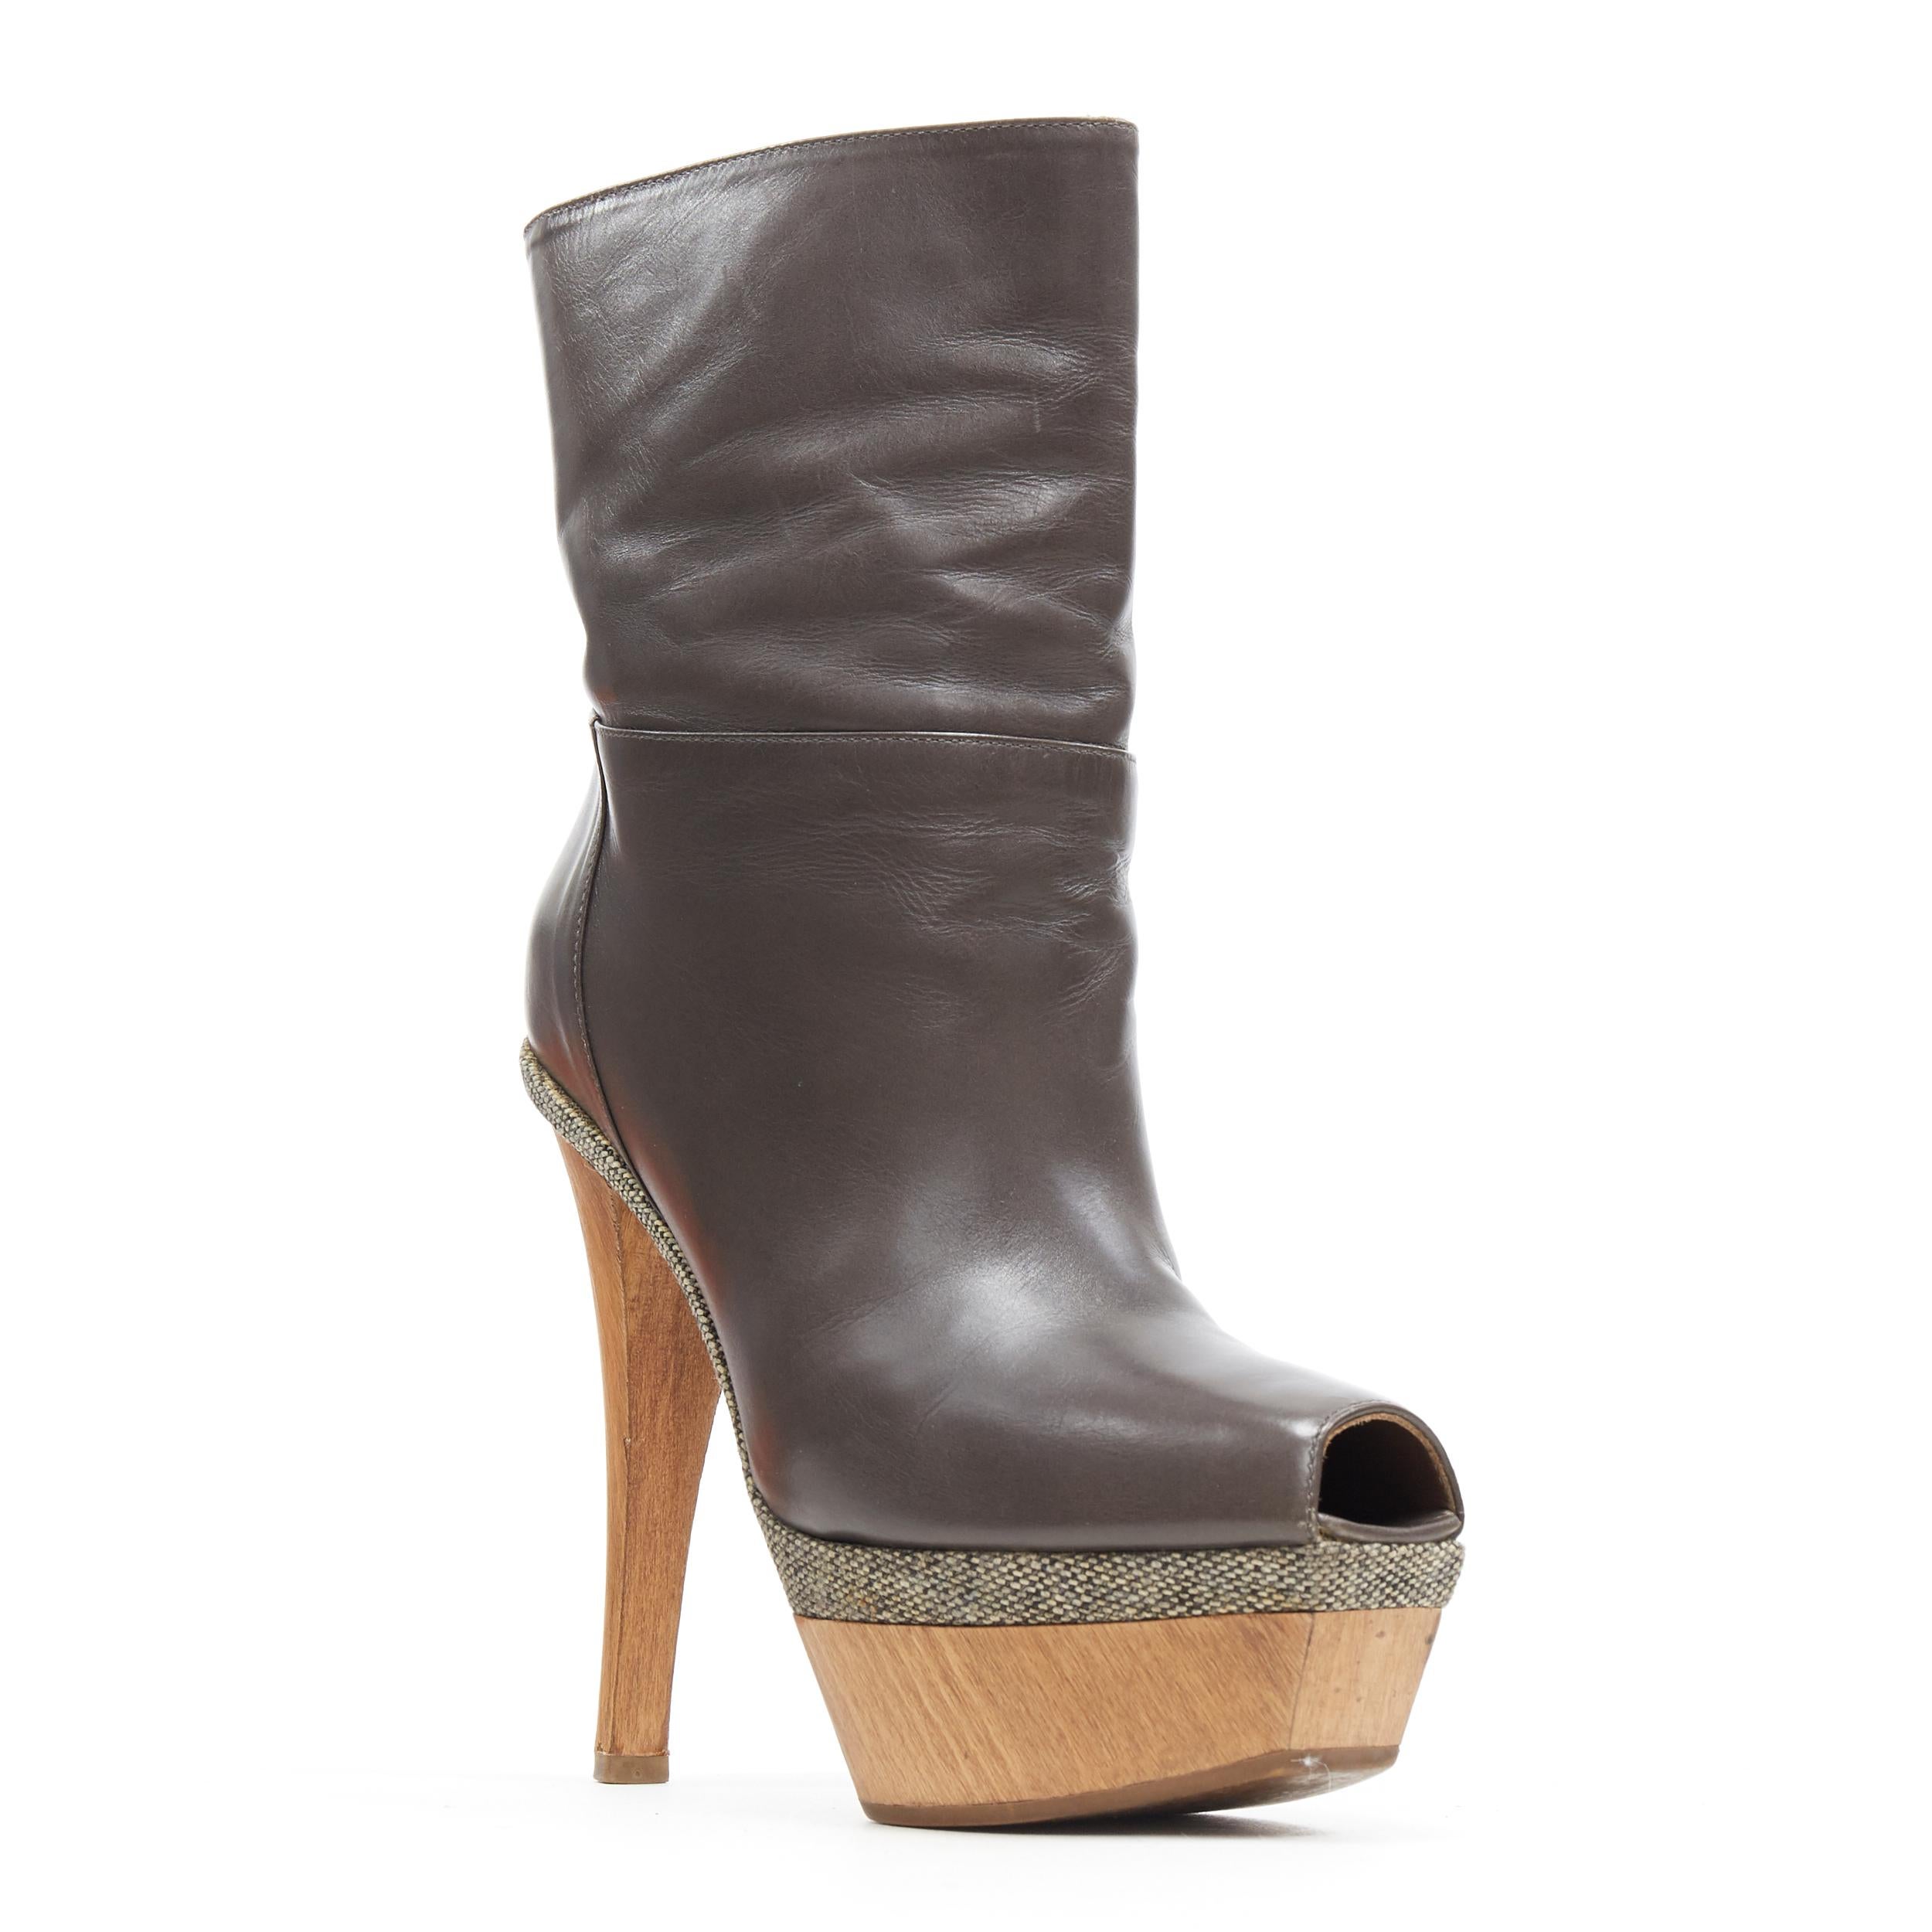 MARNI grey leather upper stacked wooden platform peep toe bootie heel EU36
Brand: Marni
Model Name / Style: Platfom boot
Material: Leather
Color: Grey
Pattern: Solid
Closure: Pull on
Extra Detail: Ultra High (4 in & Higher) heel height. Peep toe.